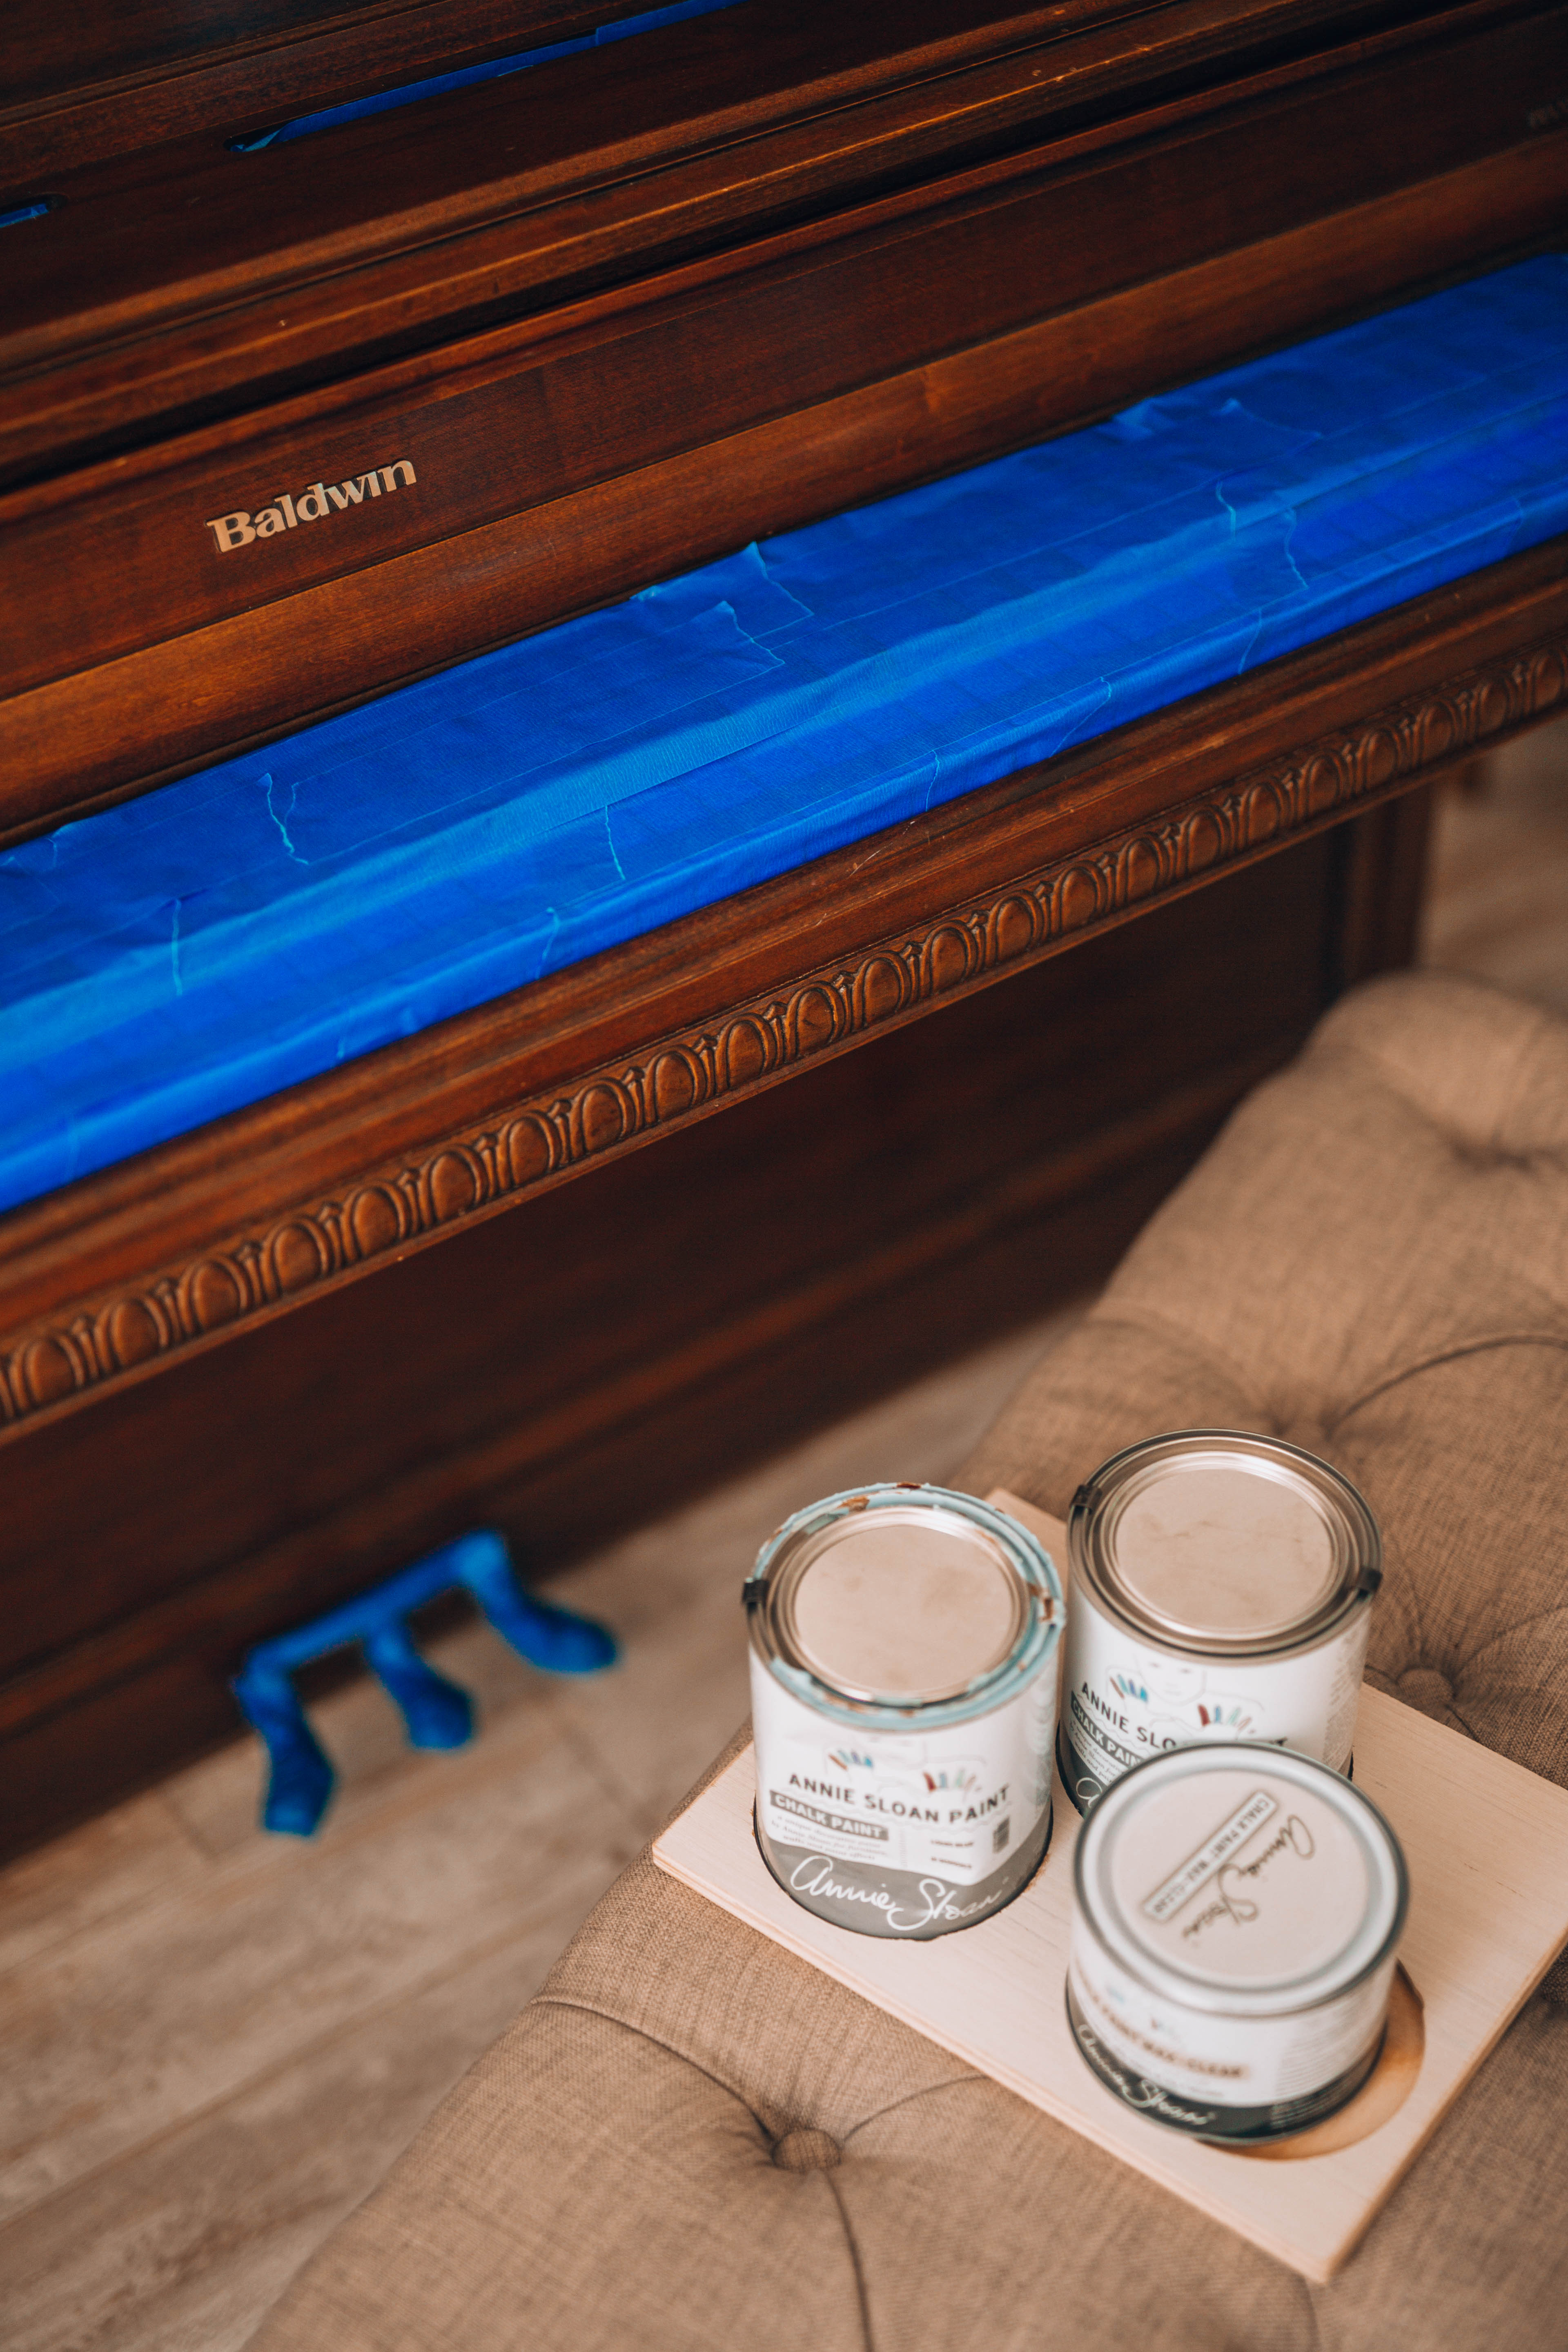 How to Paint a Piano | A quick and easy way to transform that wooden piano to any color you want!